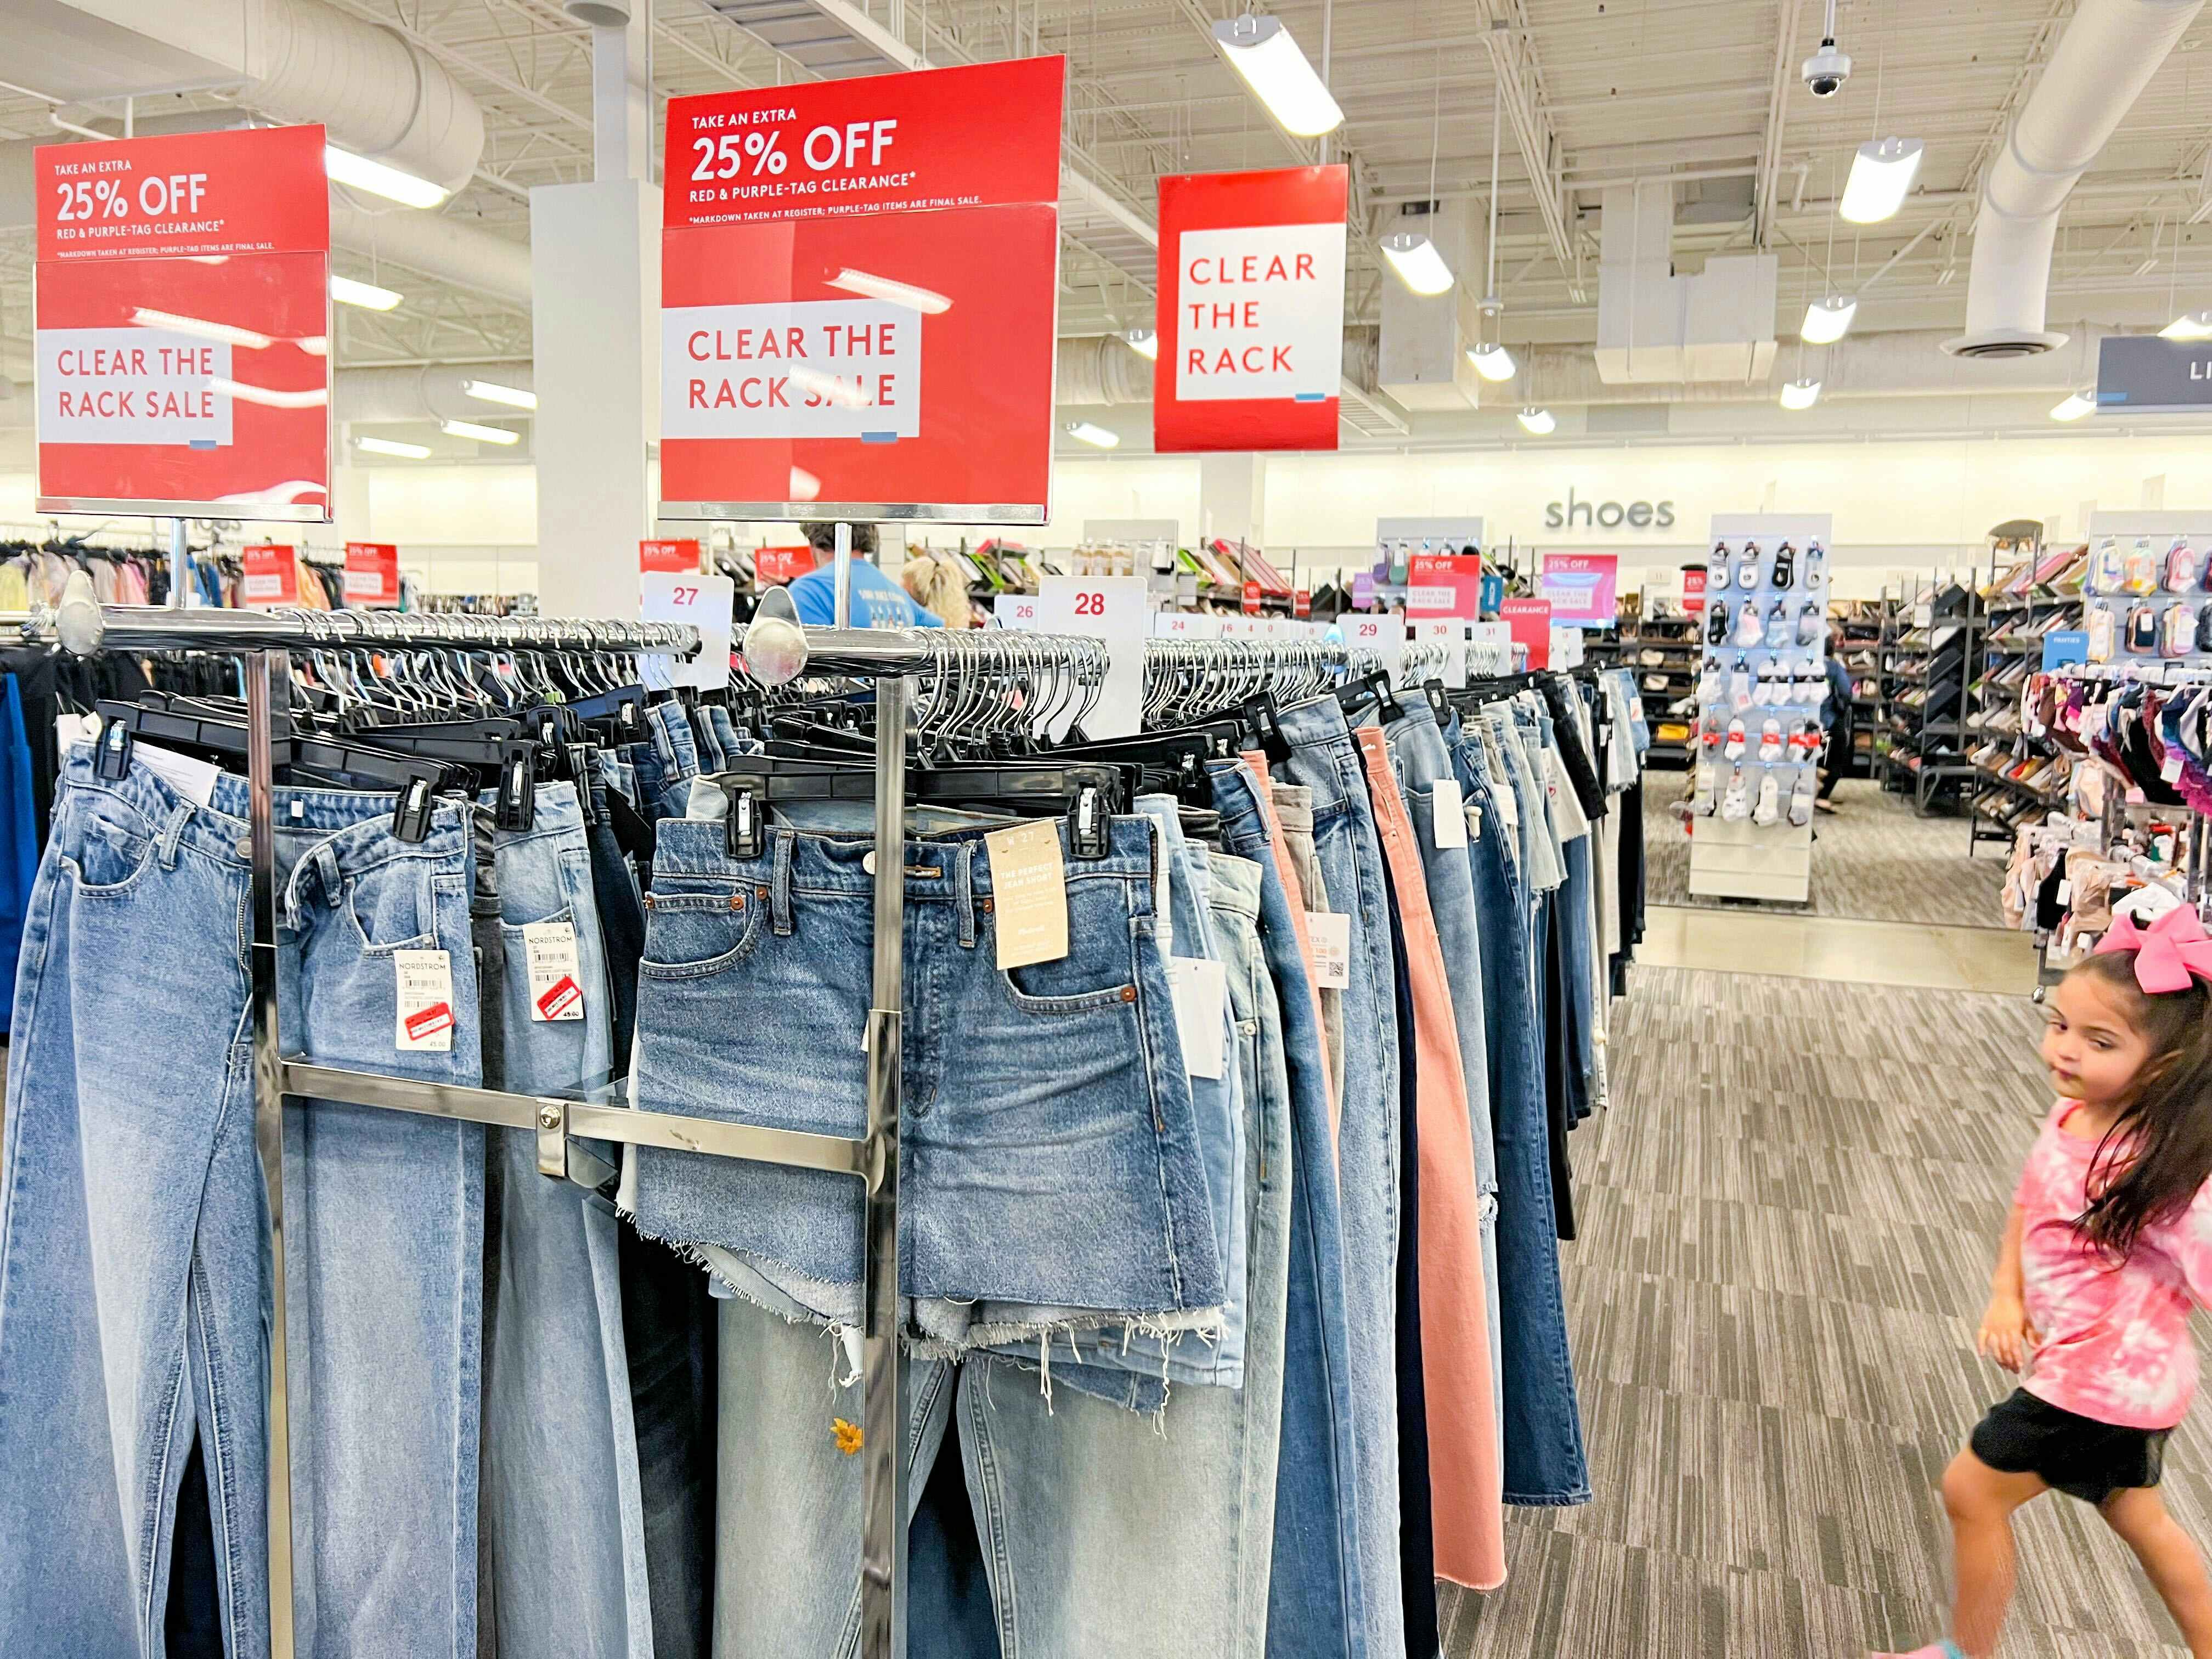 Nordstrom Rack Clear the Rack has started! Score an EXTRA 60% off red tag  clearance! This sale goes through January 2nd! Post pics if…